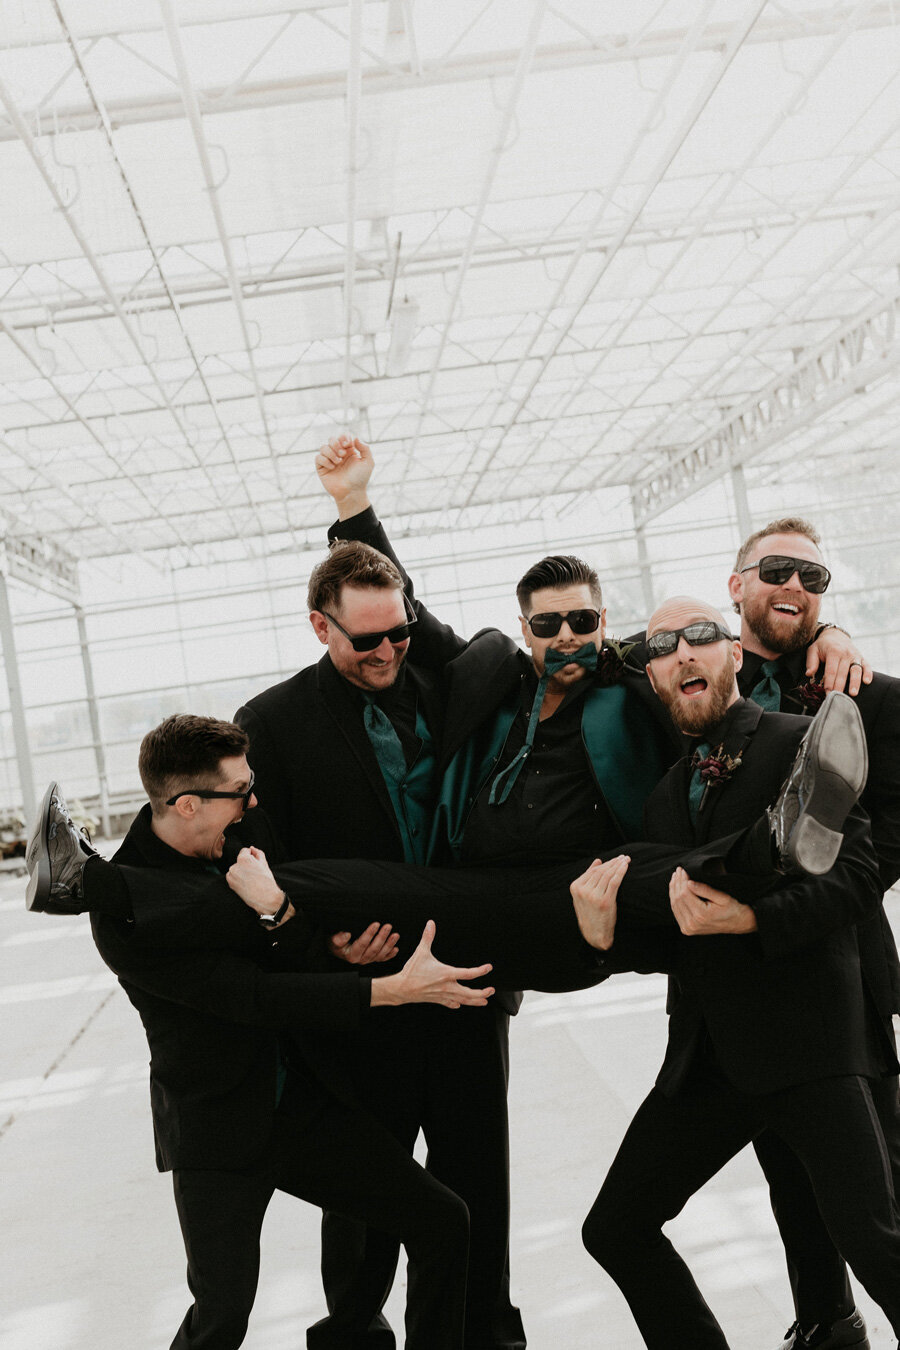 Groomsmen carrying groom with sunglasses on.